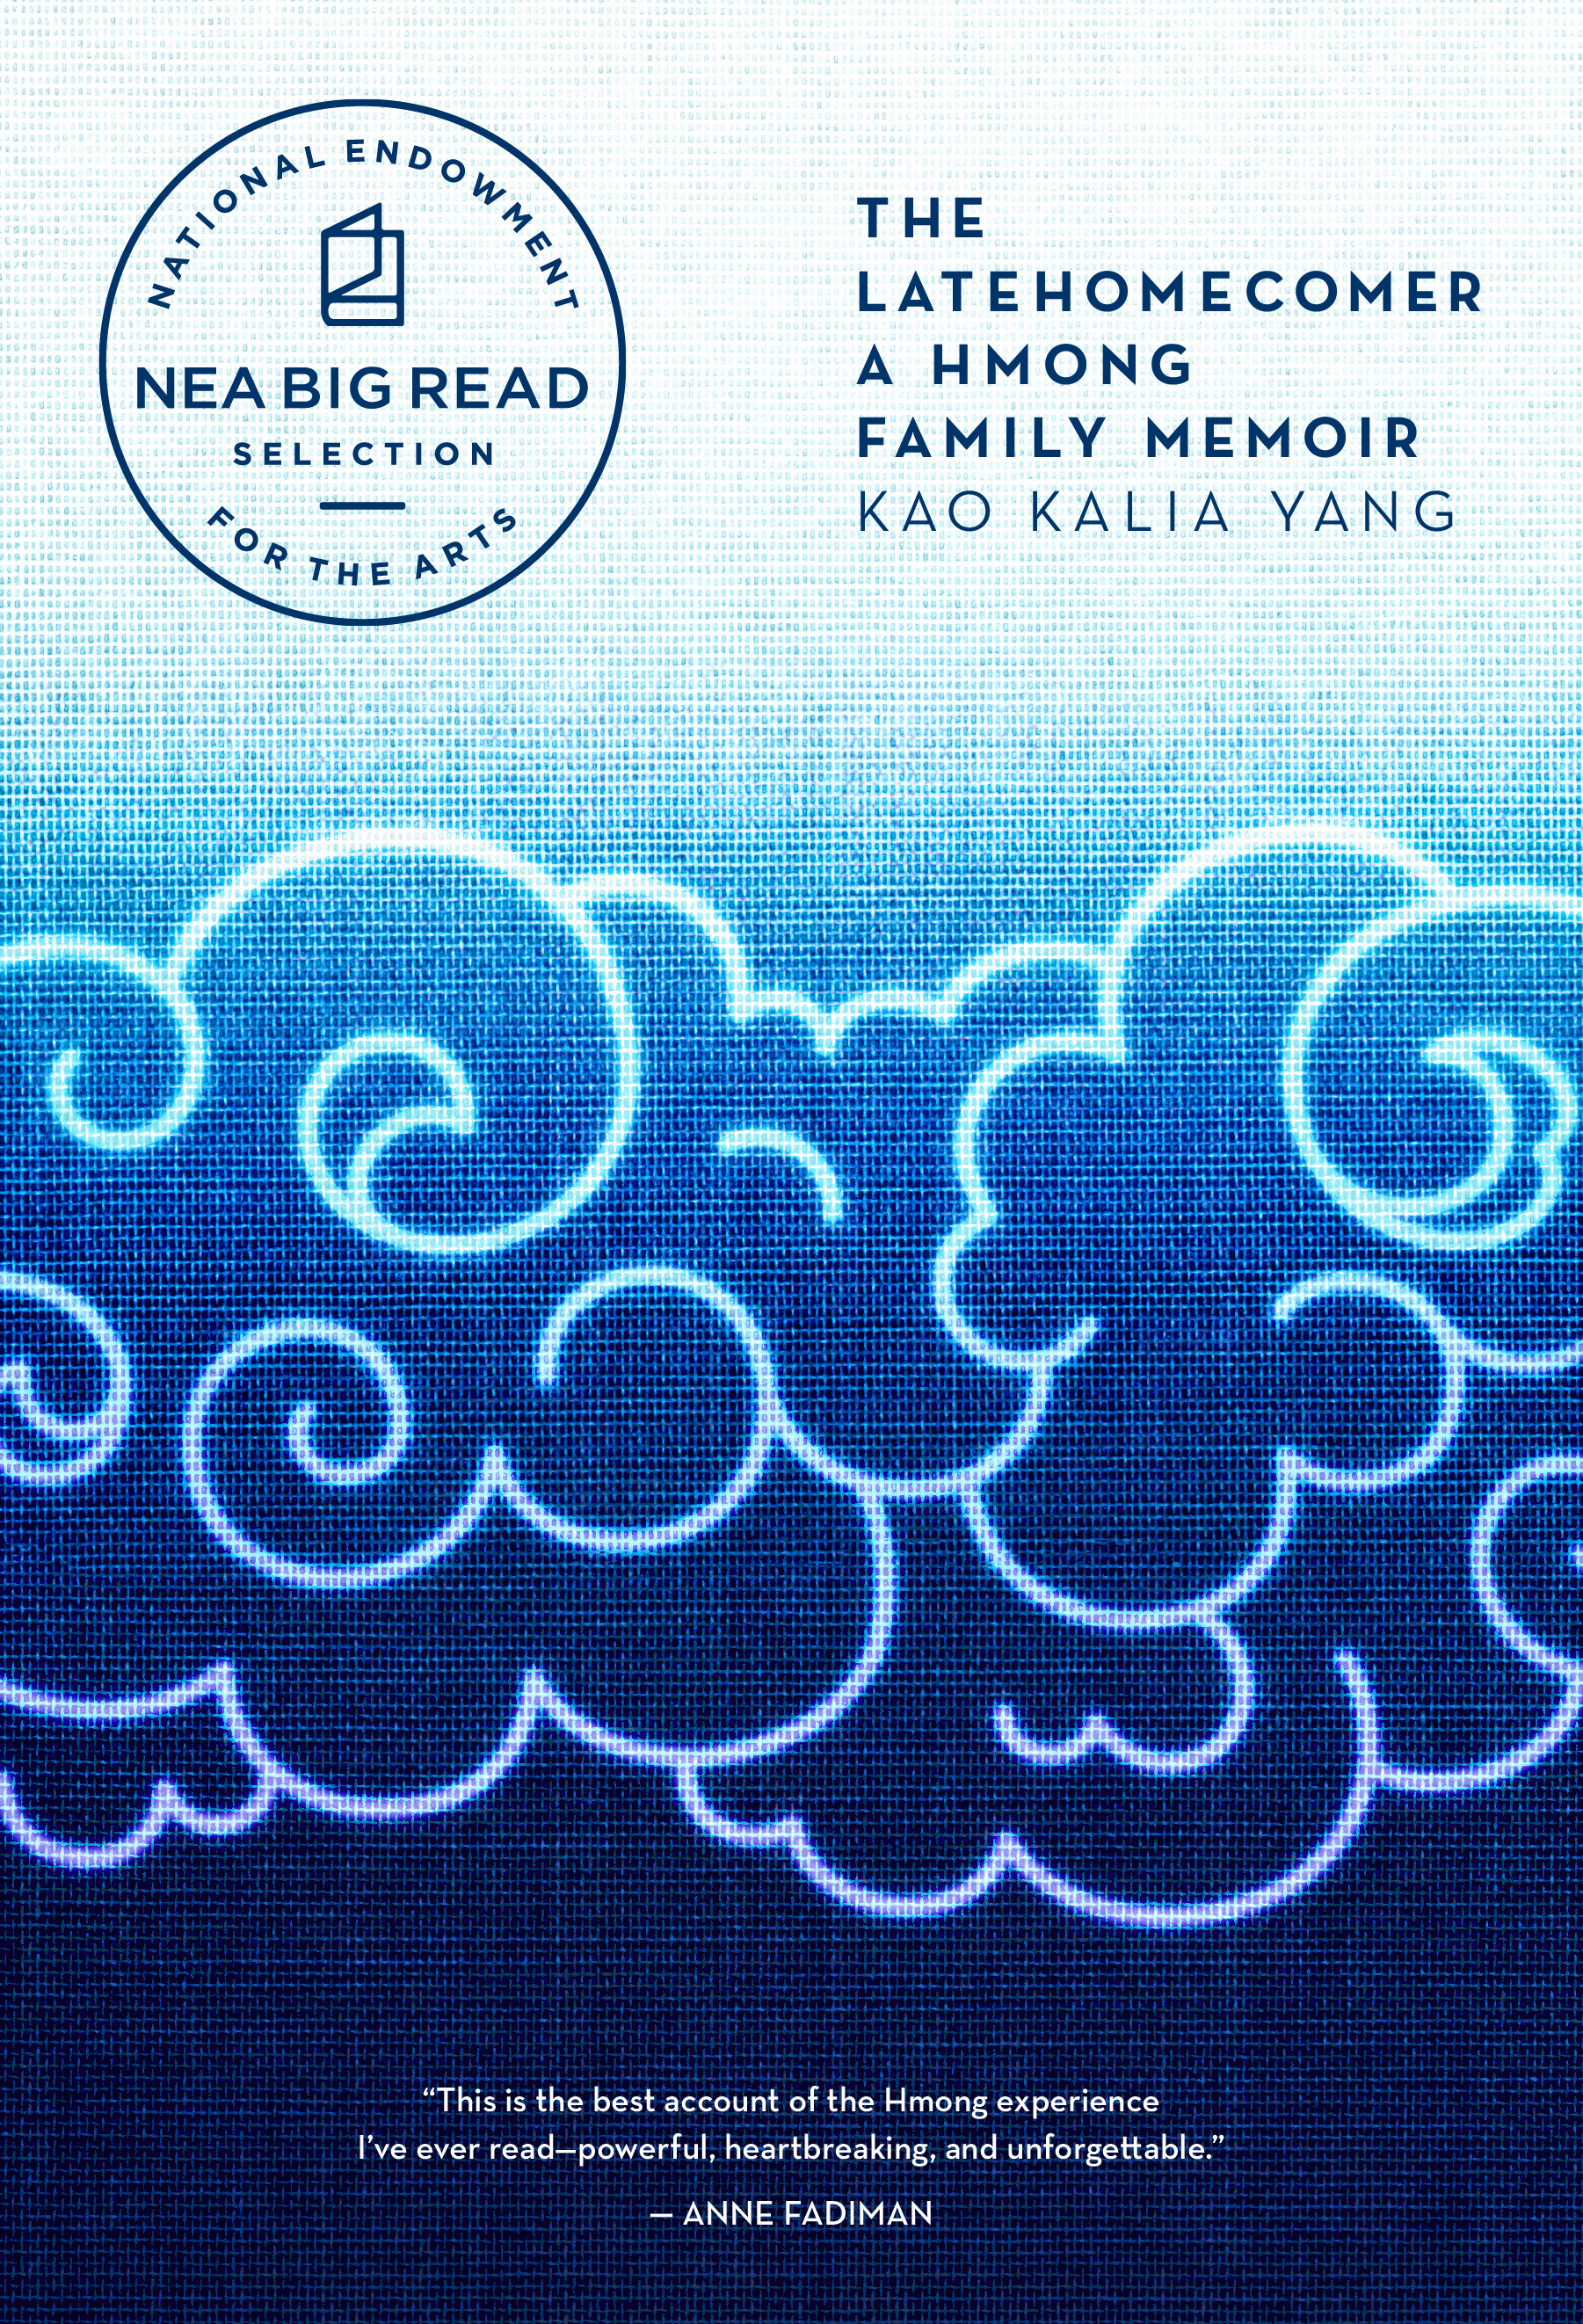 Book cover: author name and book title in the upper right corner against a blue background with calligraphy style clouds